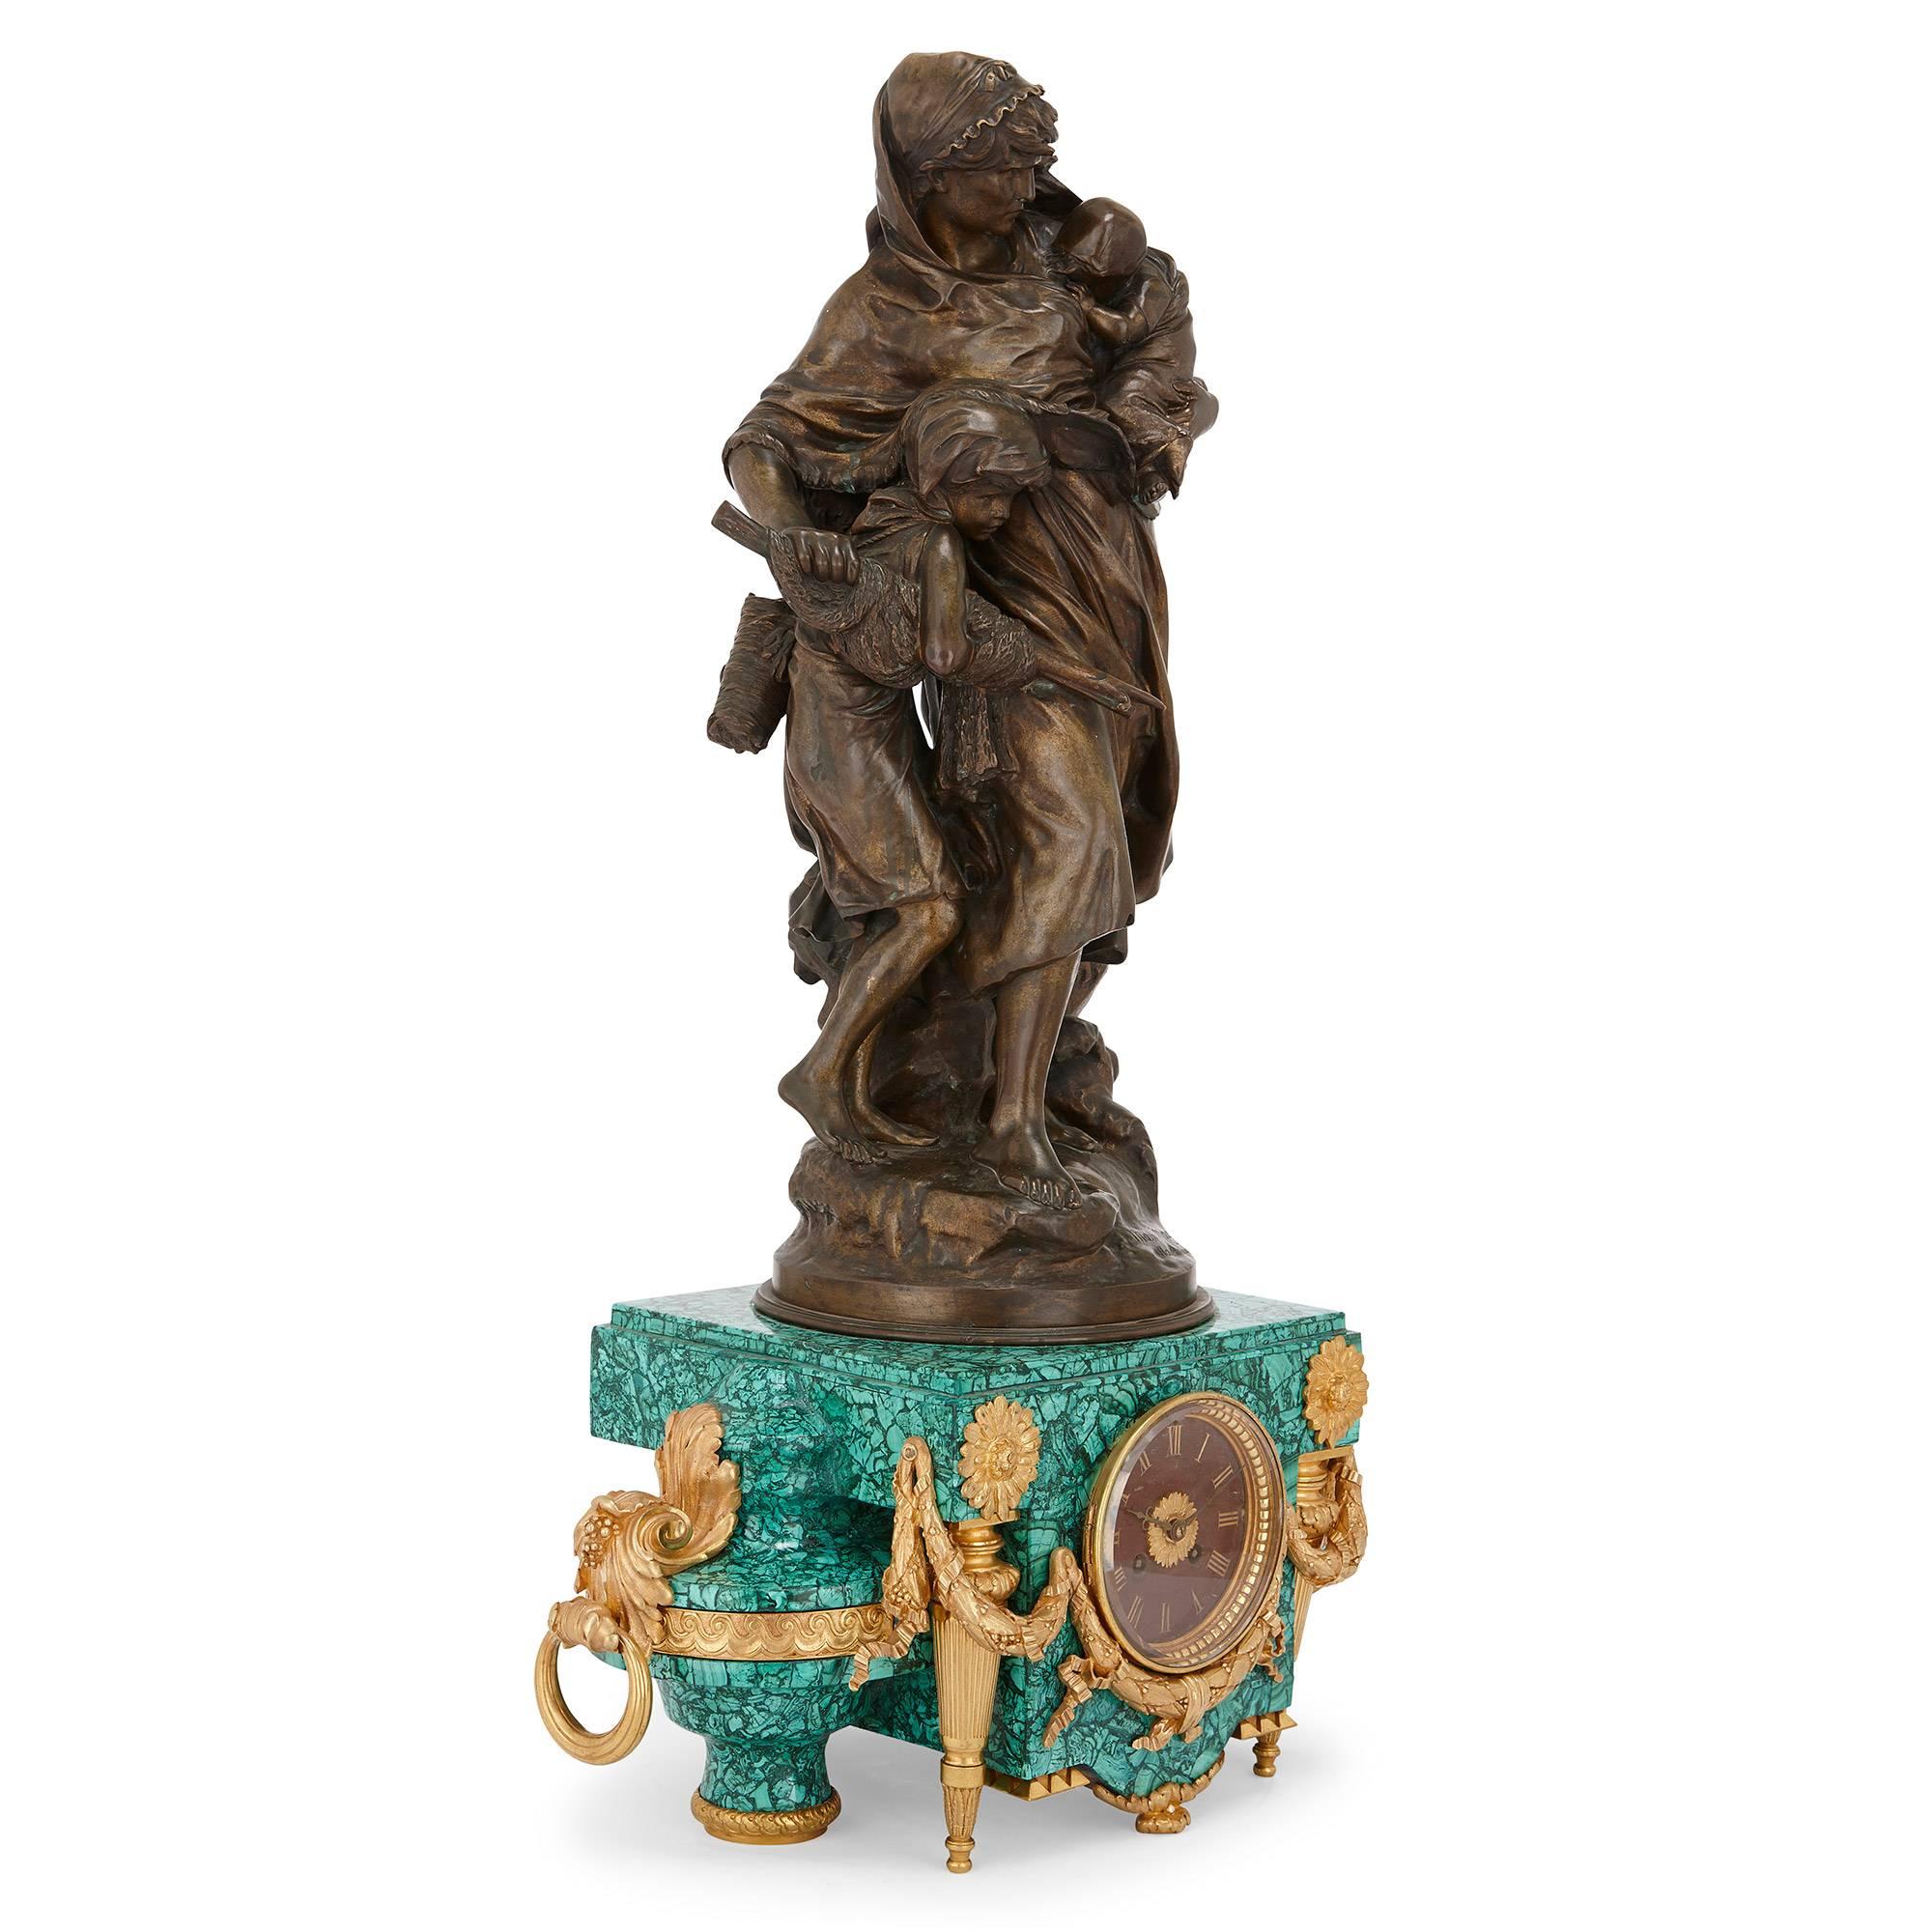 This beautiful antique mantel clock is set on a malachite base with ormolu mounts, and is notable for its patinated bronze group, which is by Mathurin Moreau and entitled 'The Fisherman's Wife'.

Height of patinated bronze 60cm
Height of clock